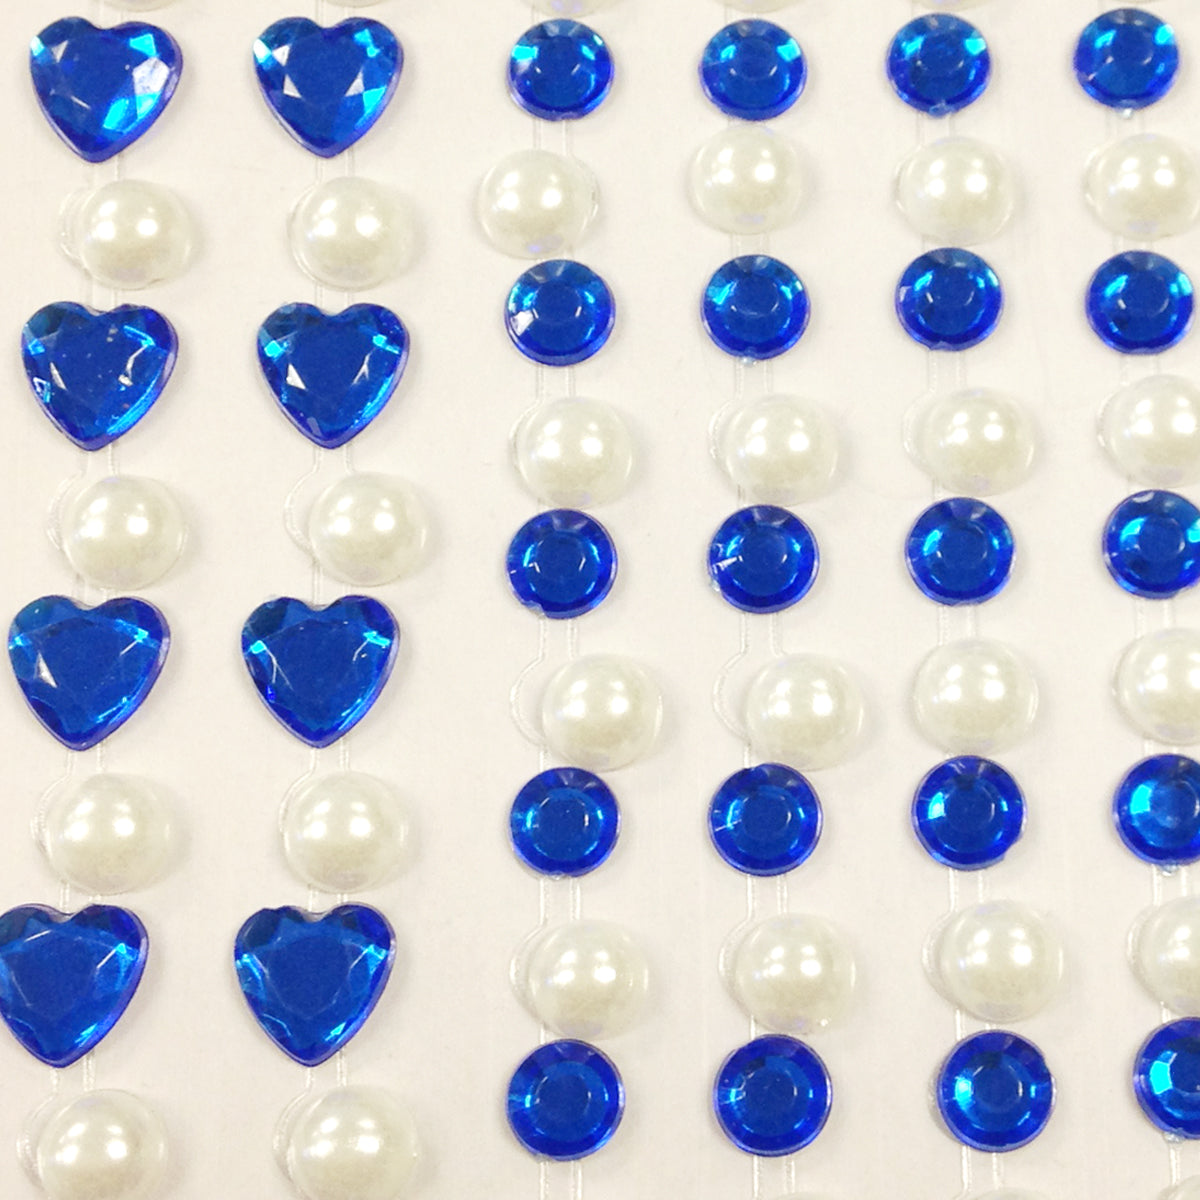 Wrapables 164 pieces Crystal Heart and Pearl Stickers Adhesive